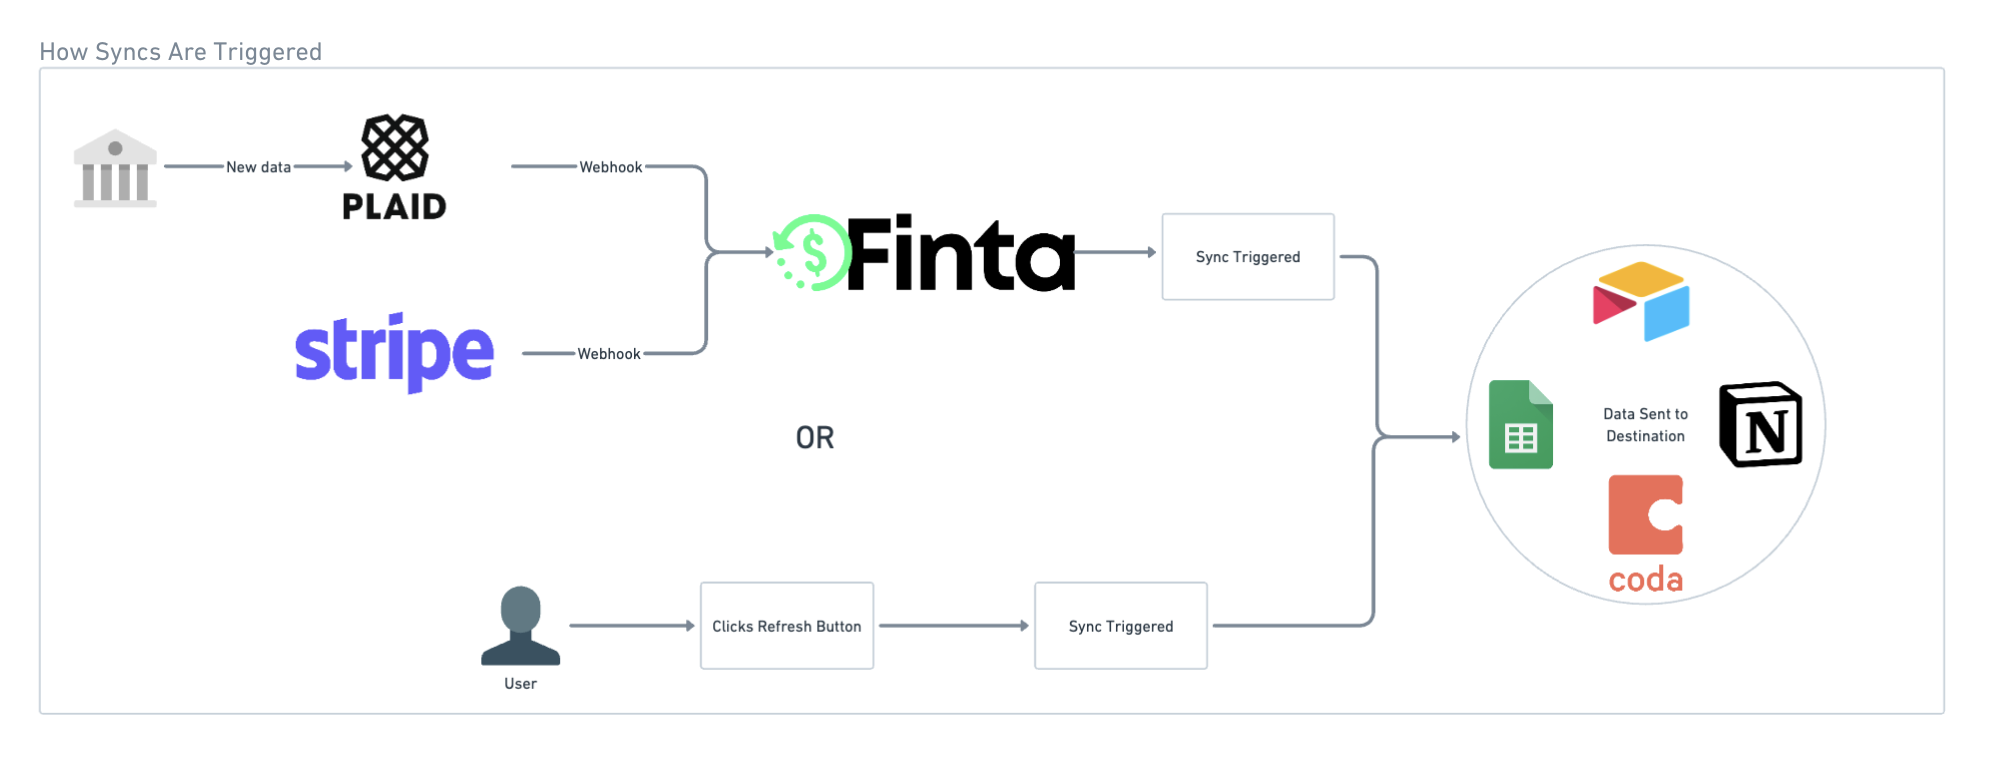 Diagram showing how webhooks and users can trigger syncs within Finta